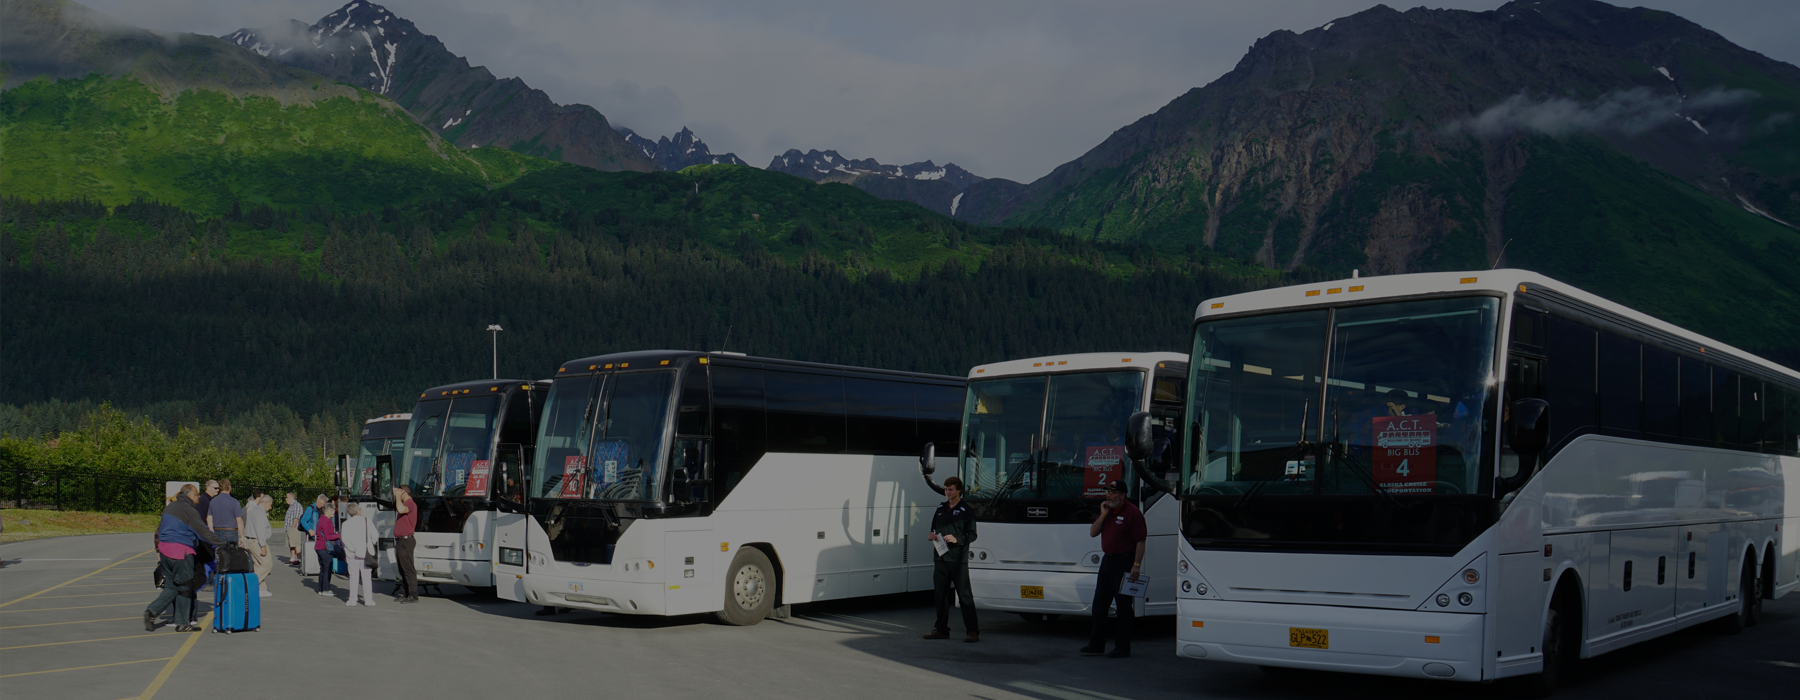 Whittier to Anchorage bus